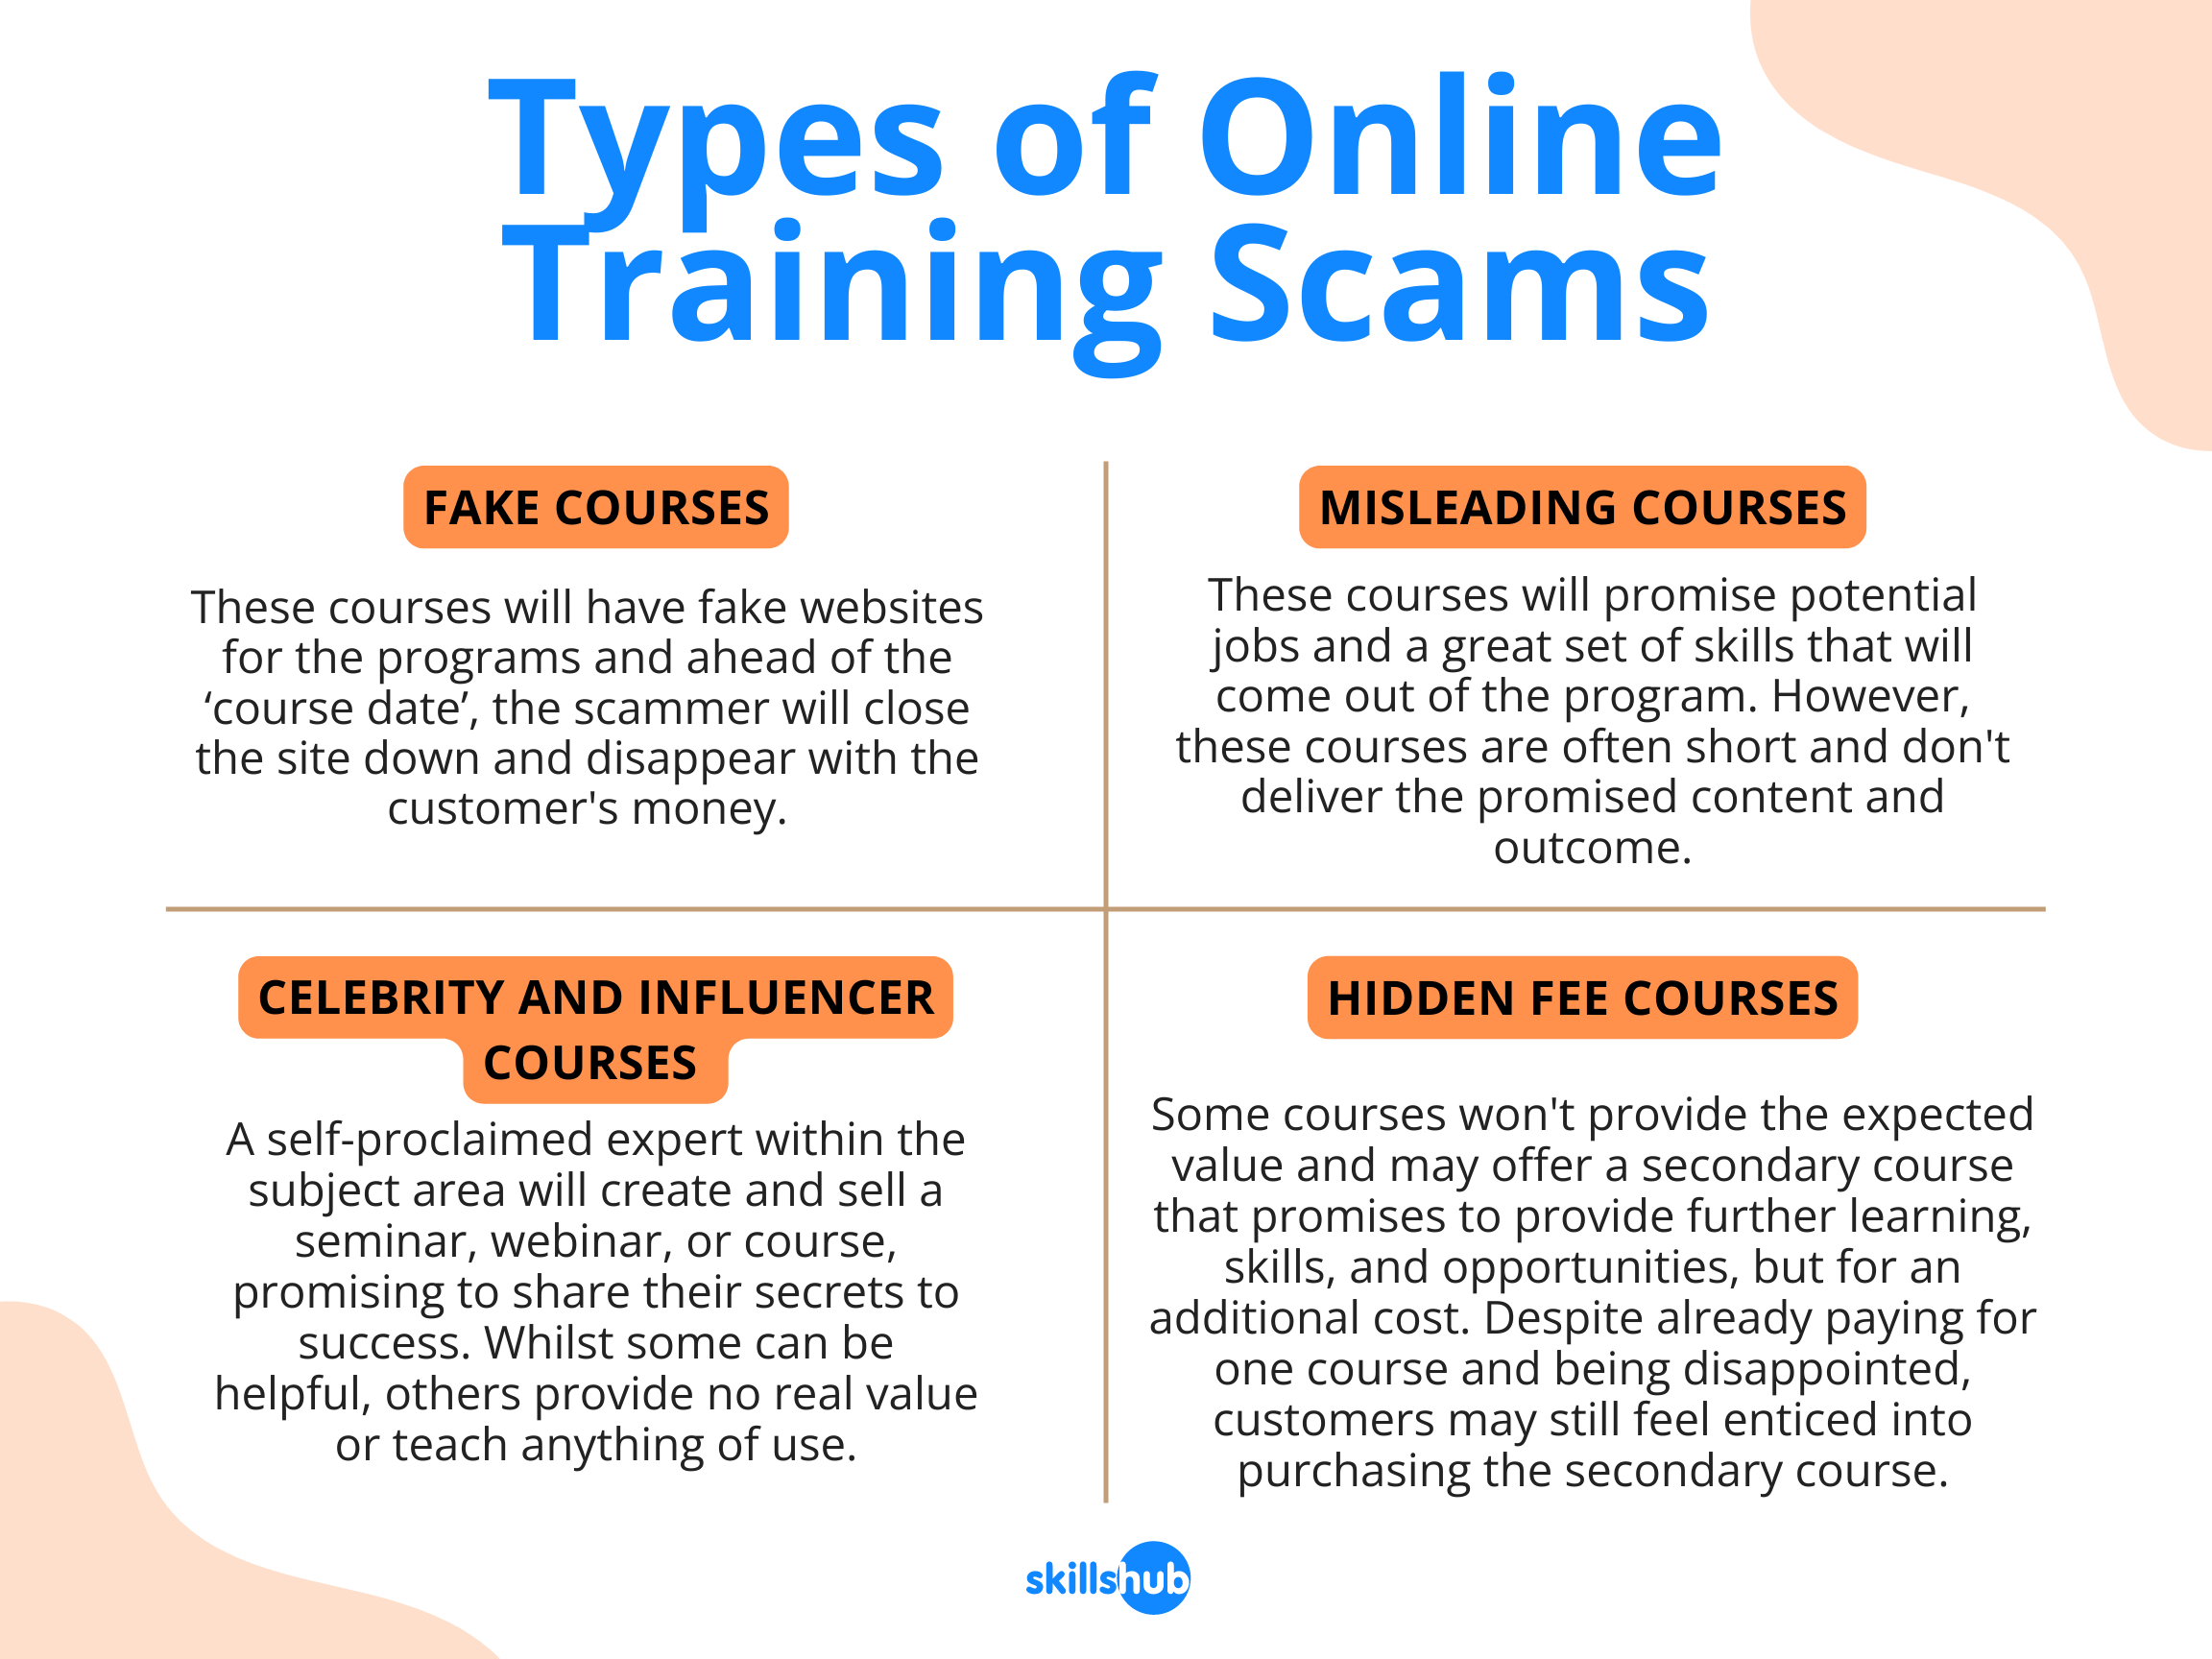 How To Tell If Online Courses Are Legitimate Or Scams